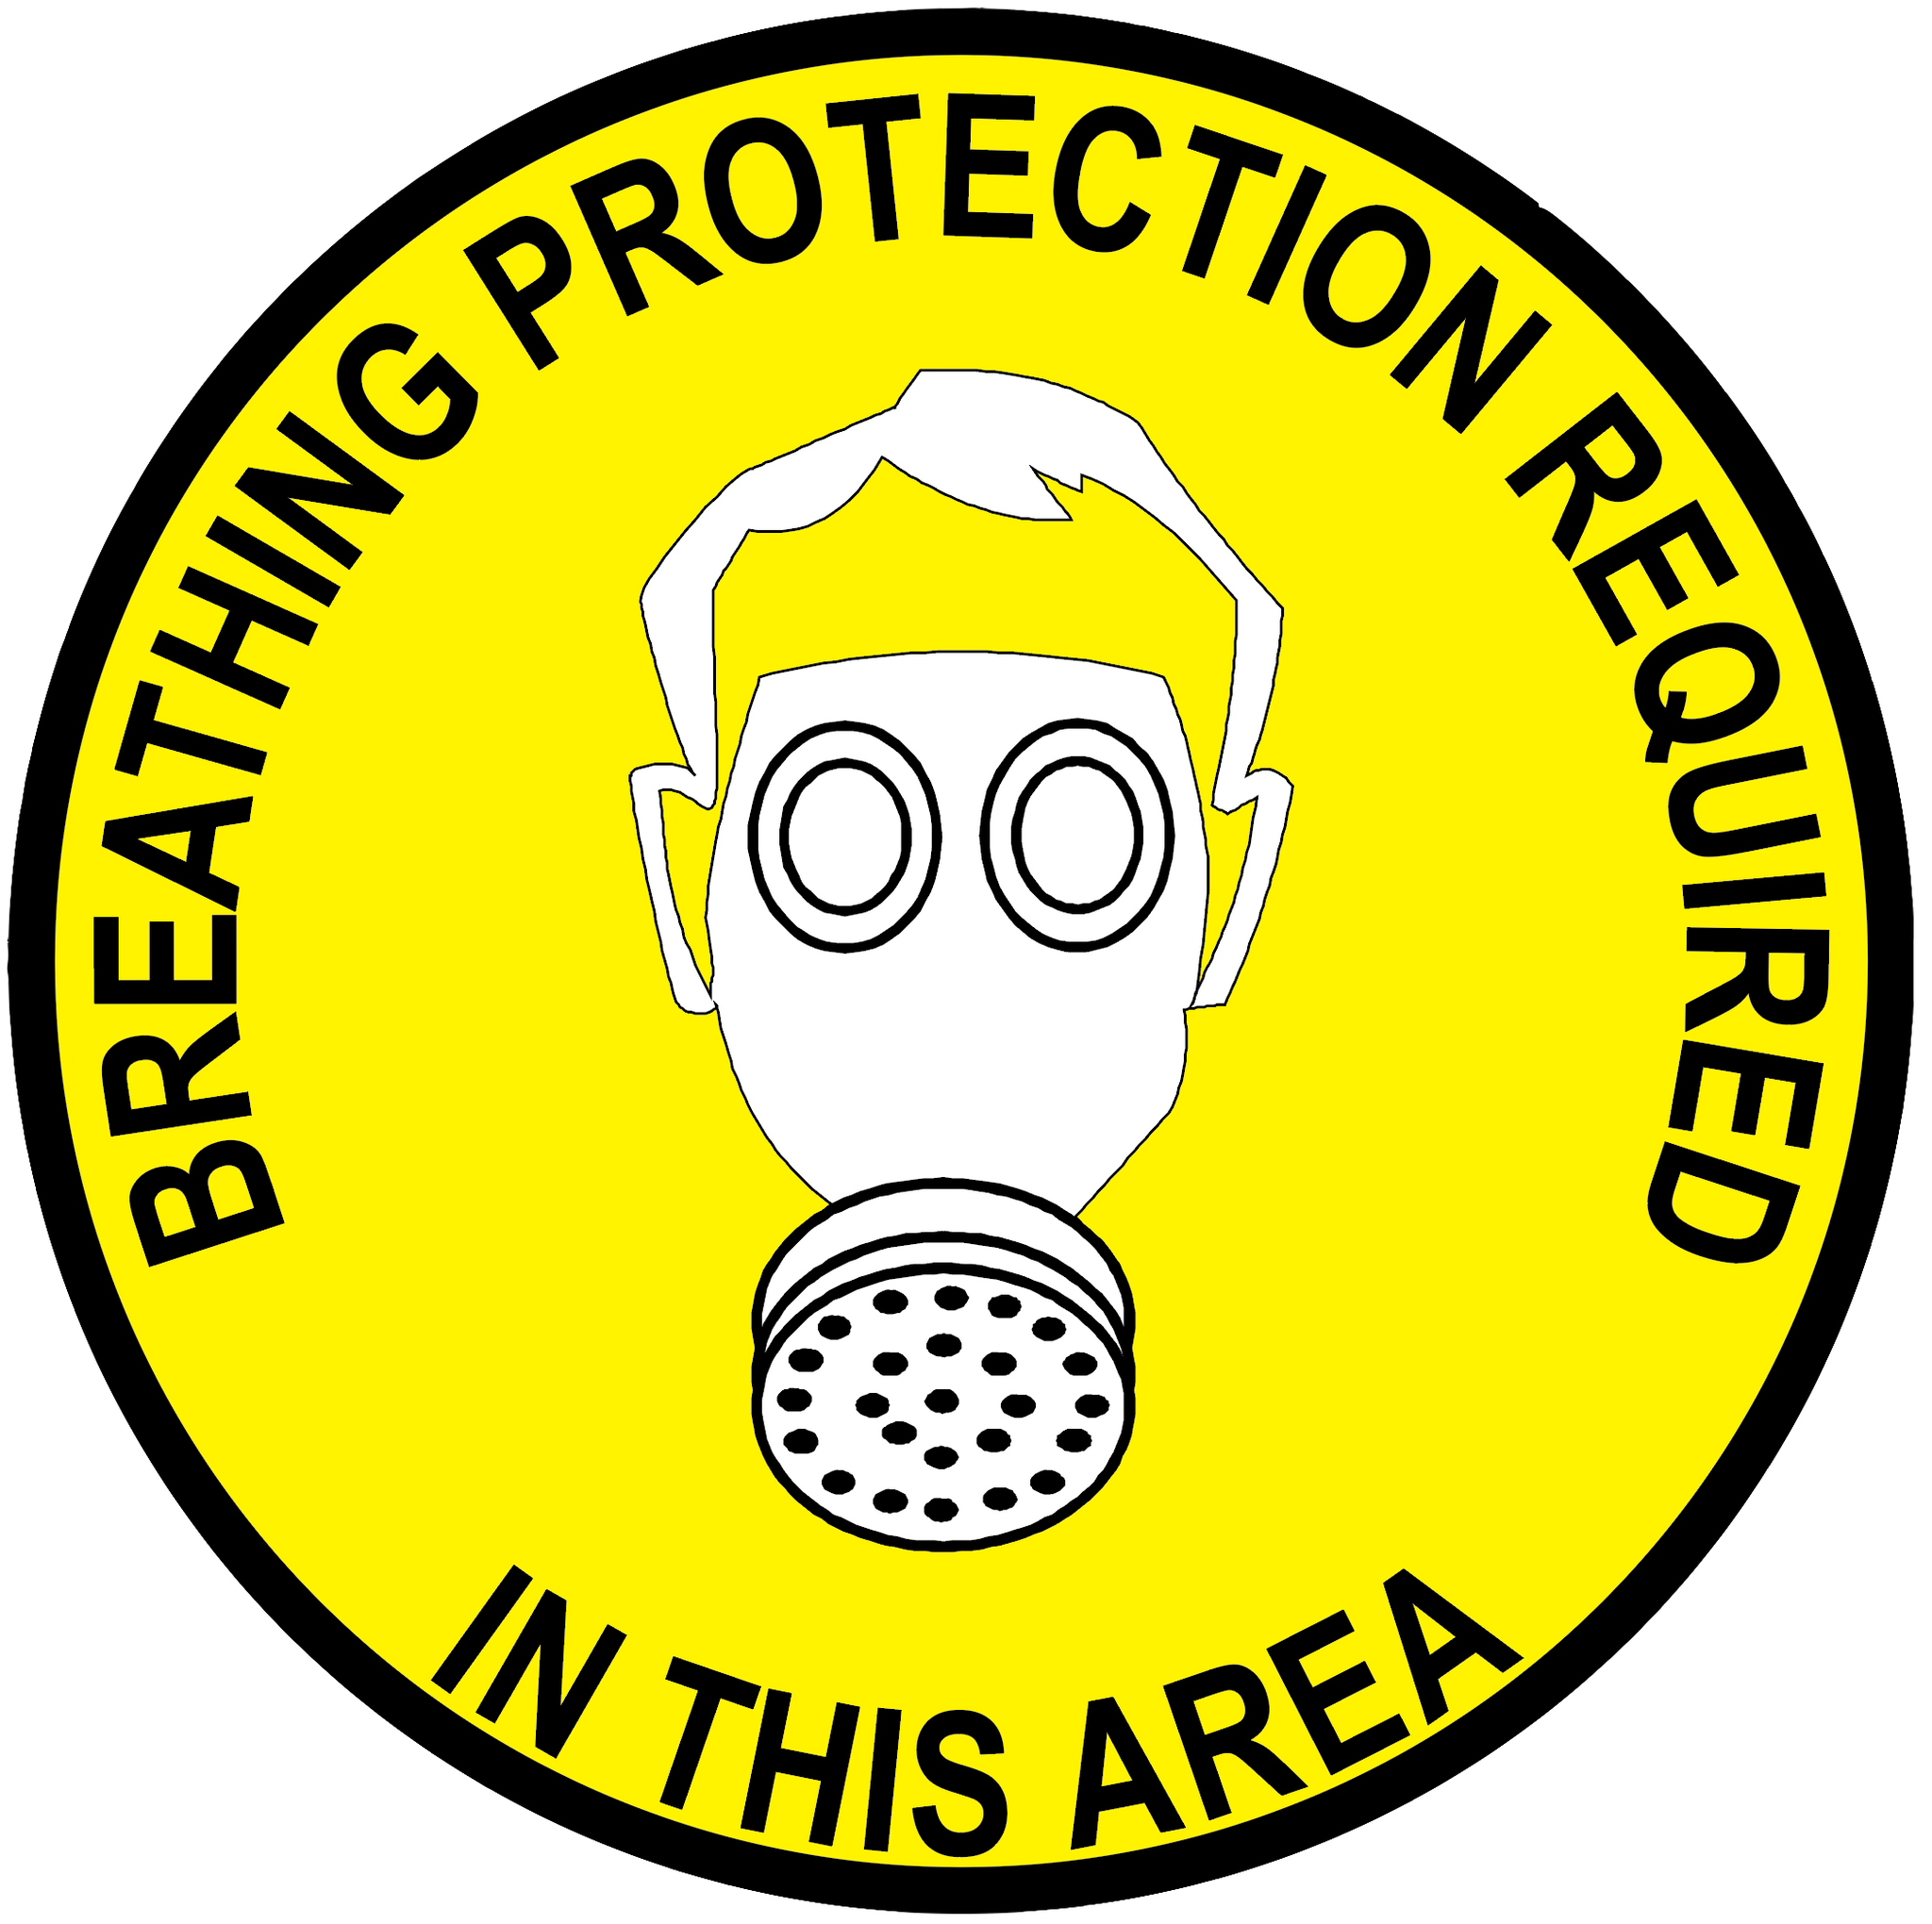 "Breathing Protection Required in This Area" Durable Matte Laminated Vinyl Floor Sign- Various Sizes Available